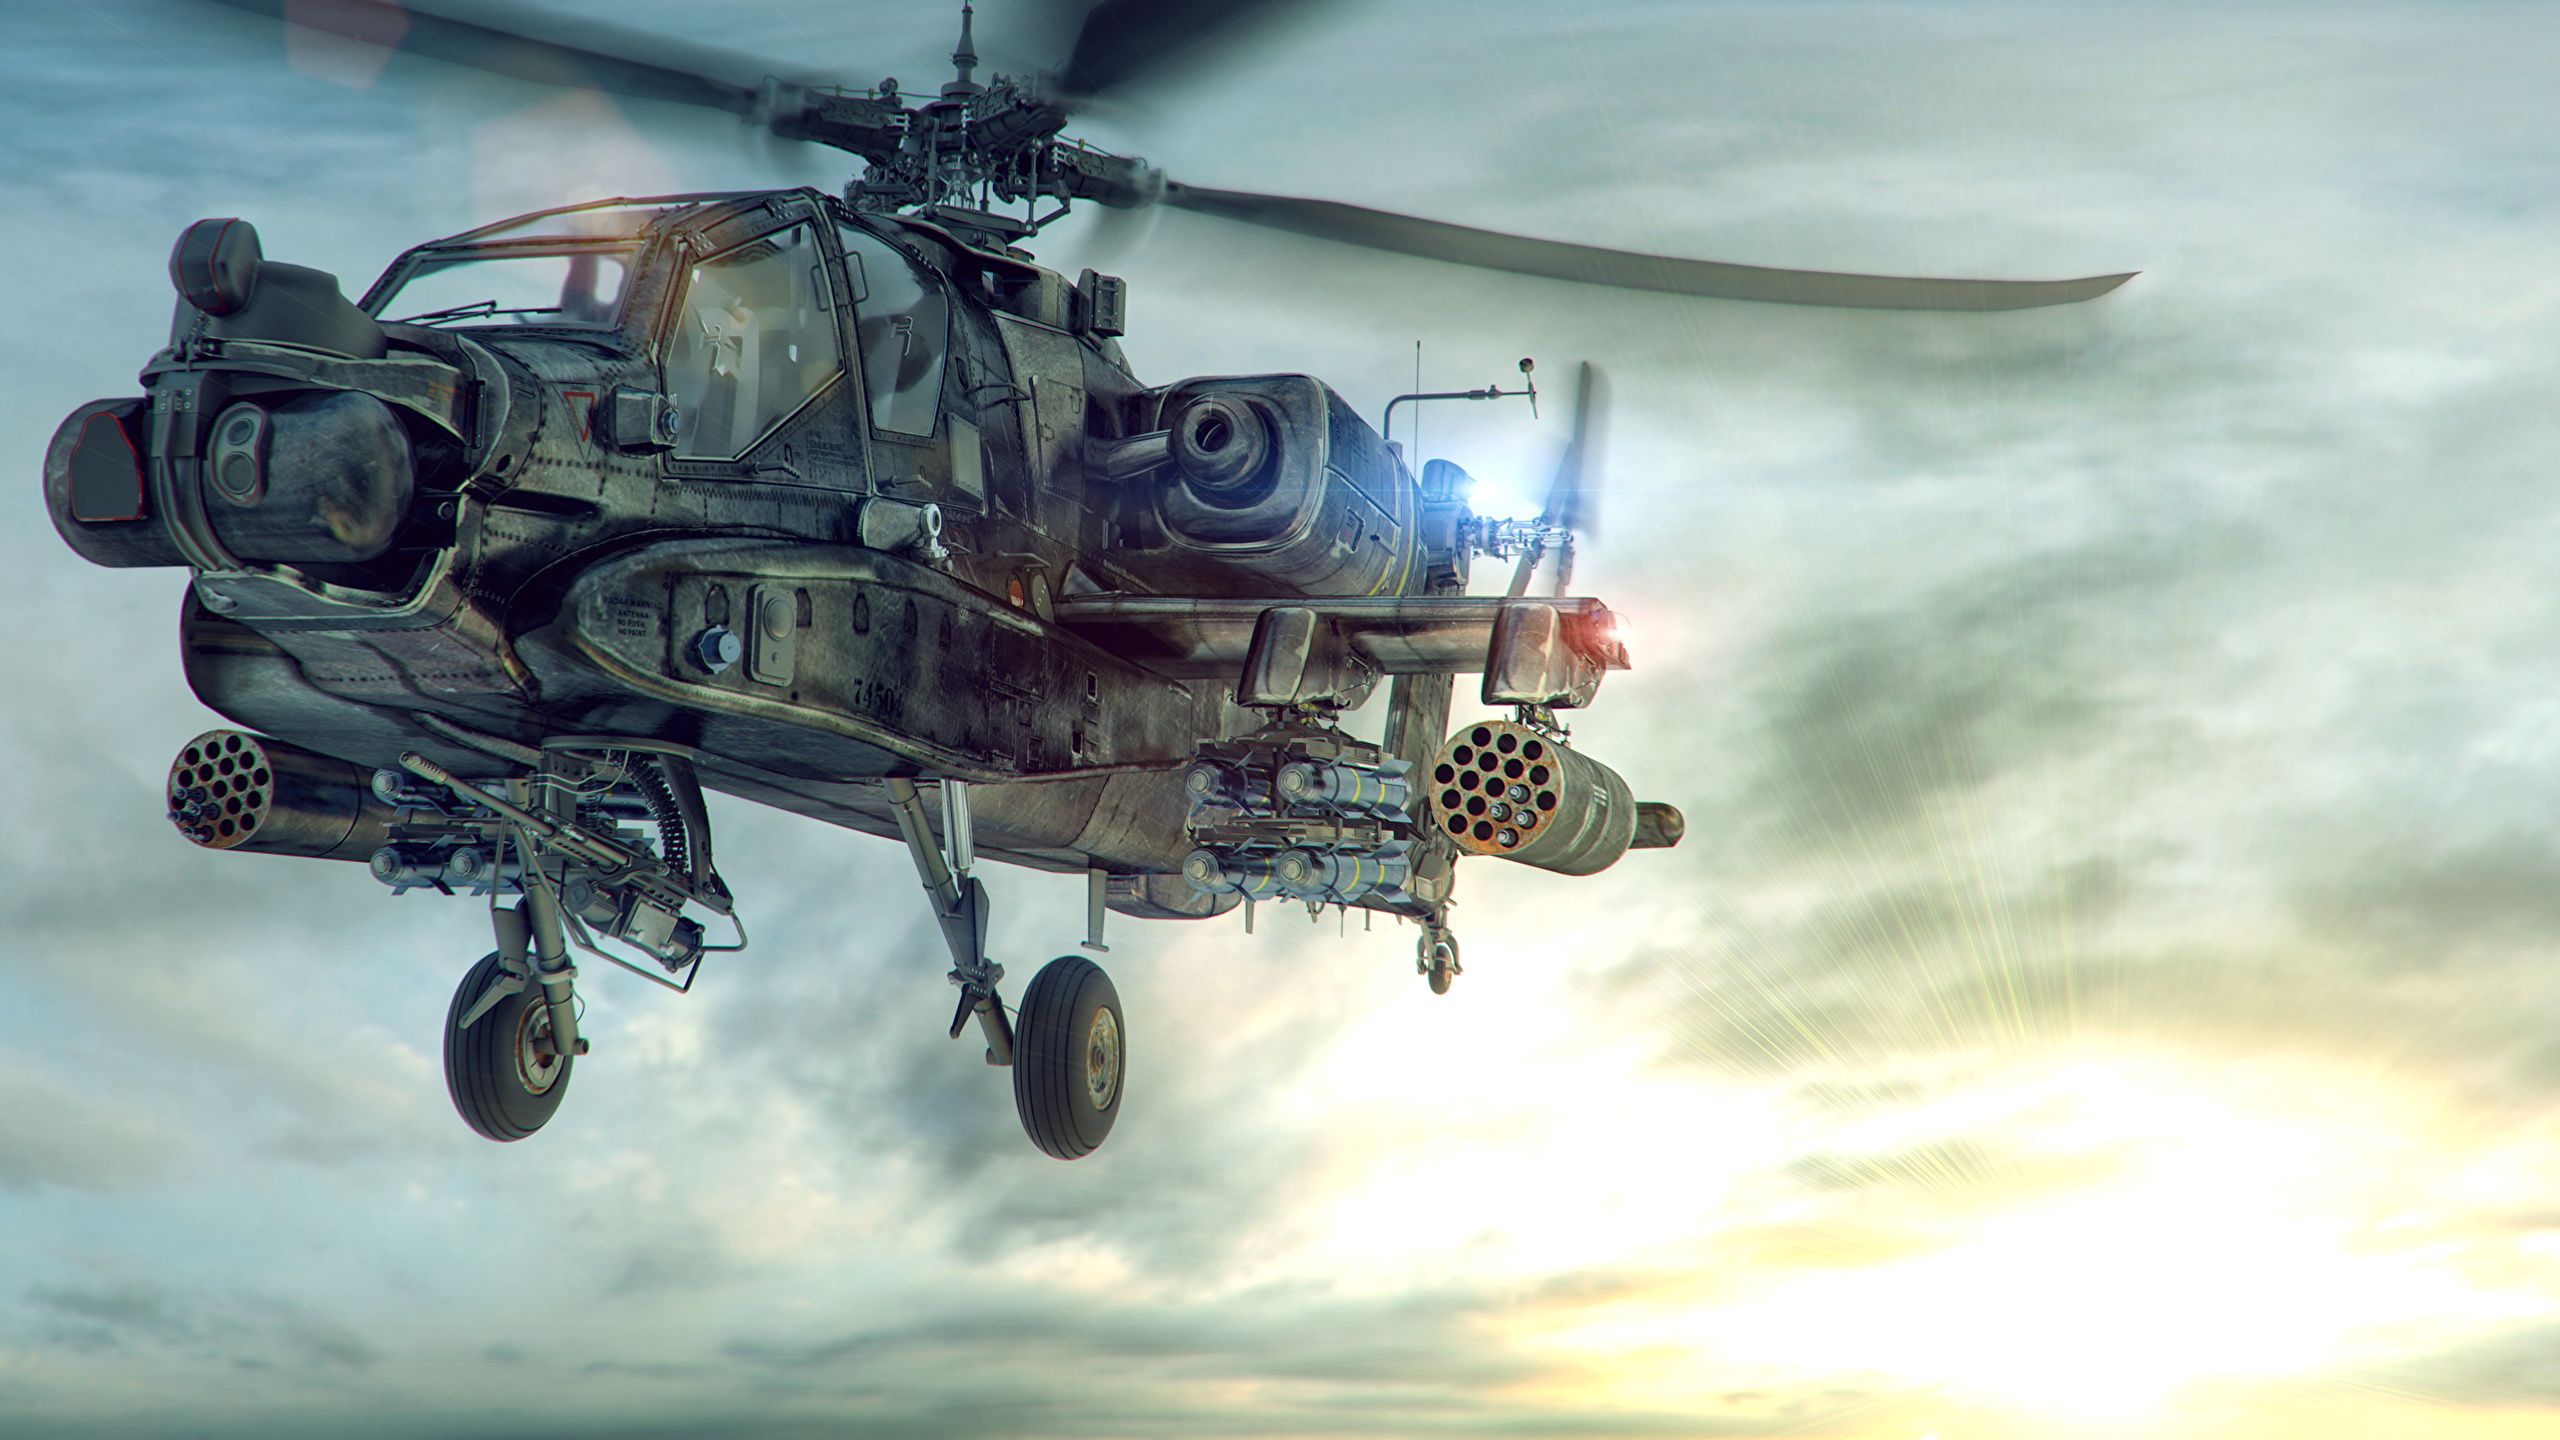 Ah-64 Apache Longbow Helicopter Wallpapers - Wallpaper Cave